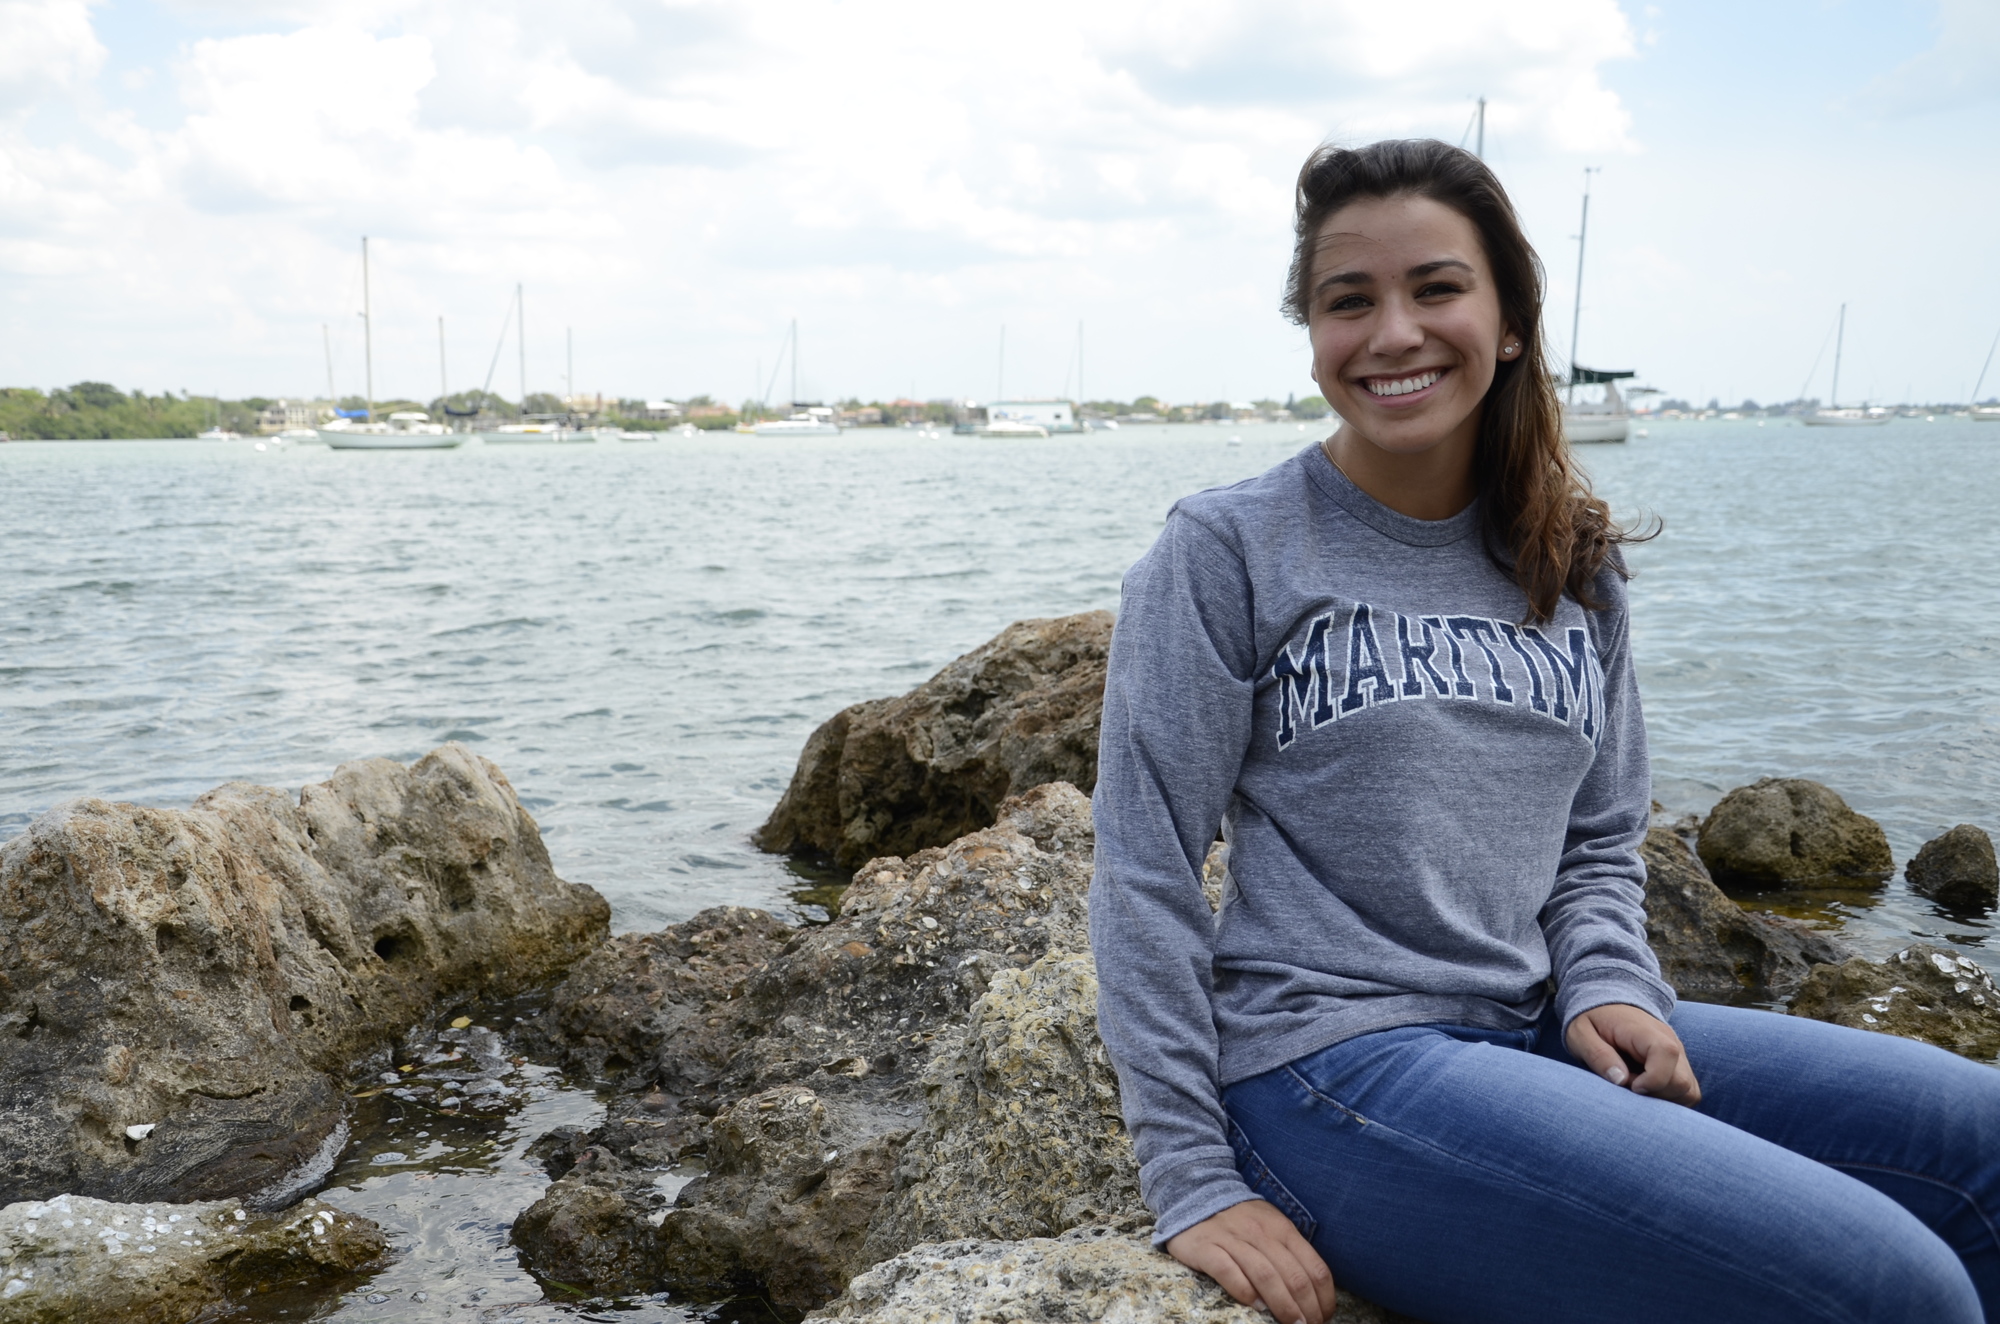 Although Miller Condrack sailed for a Venice team, she said competing in the regattas in Sarasota Bay were fun because it was like sailing at 